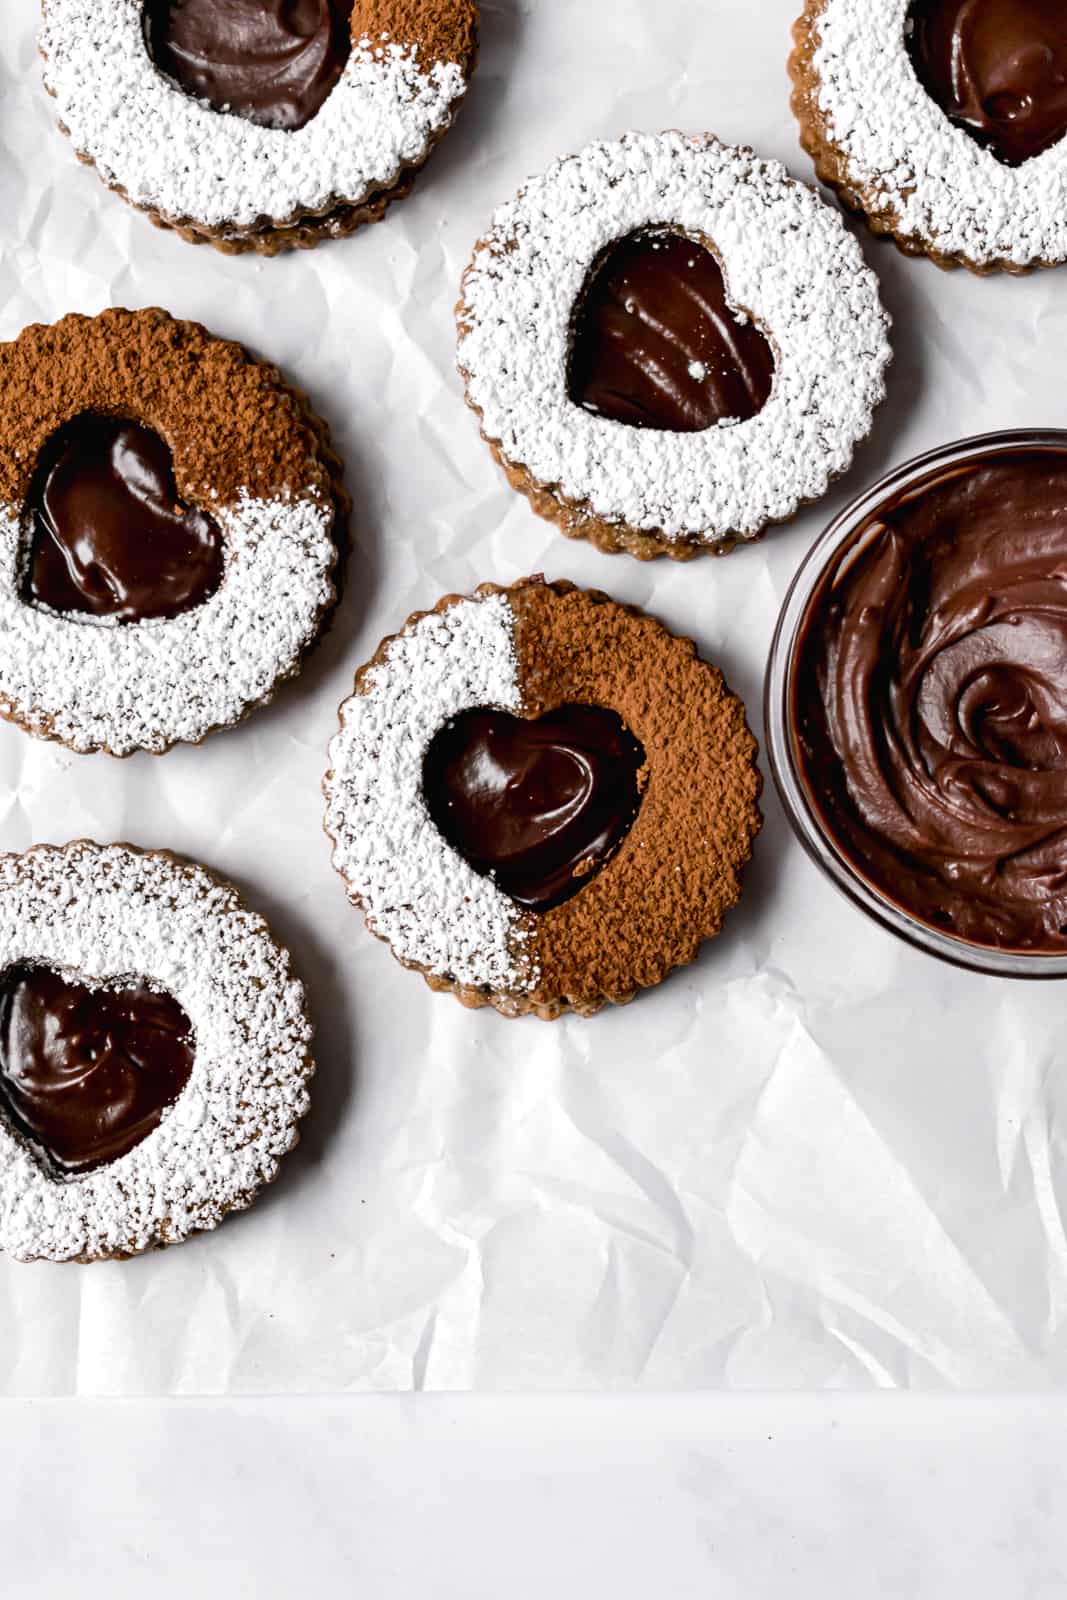 chocolate espresso linzer cookies with powdered sugar and cocoa powder on parchment paper.